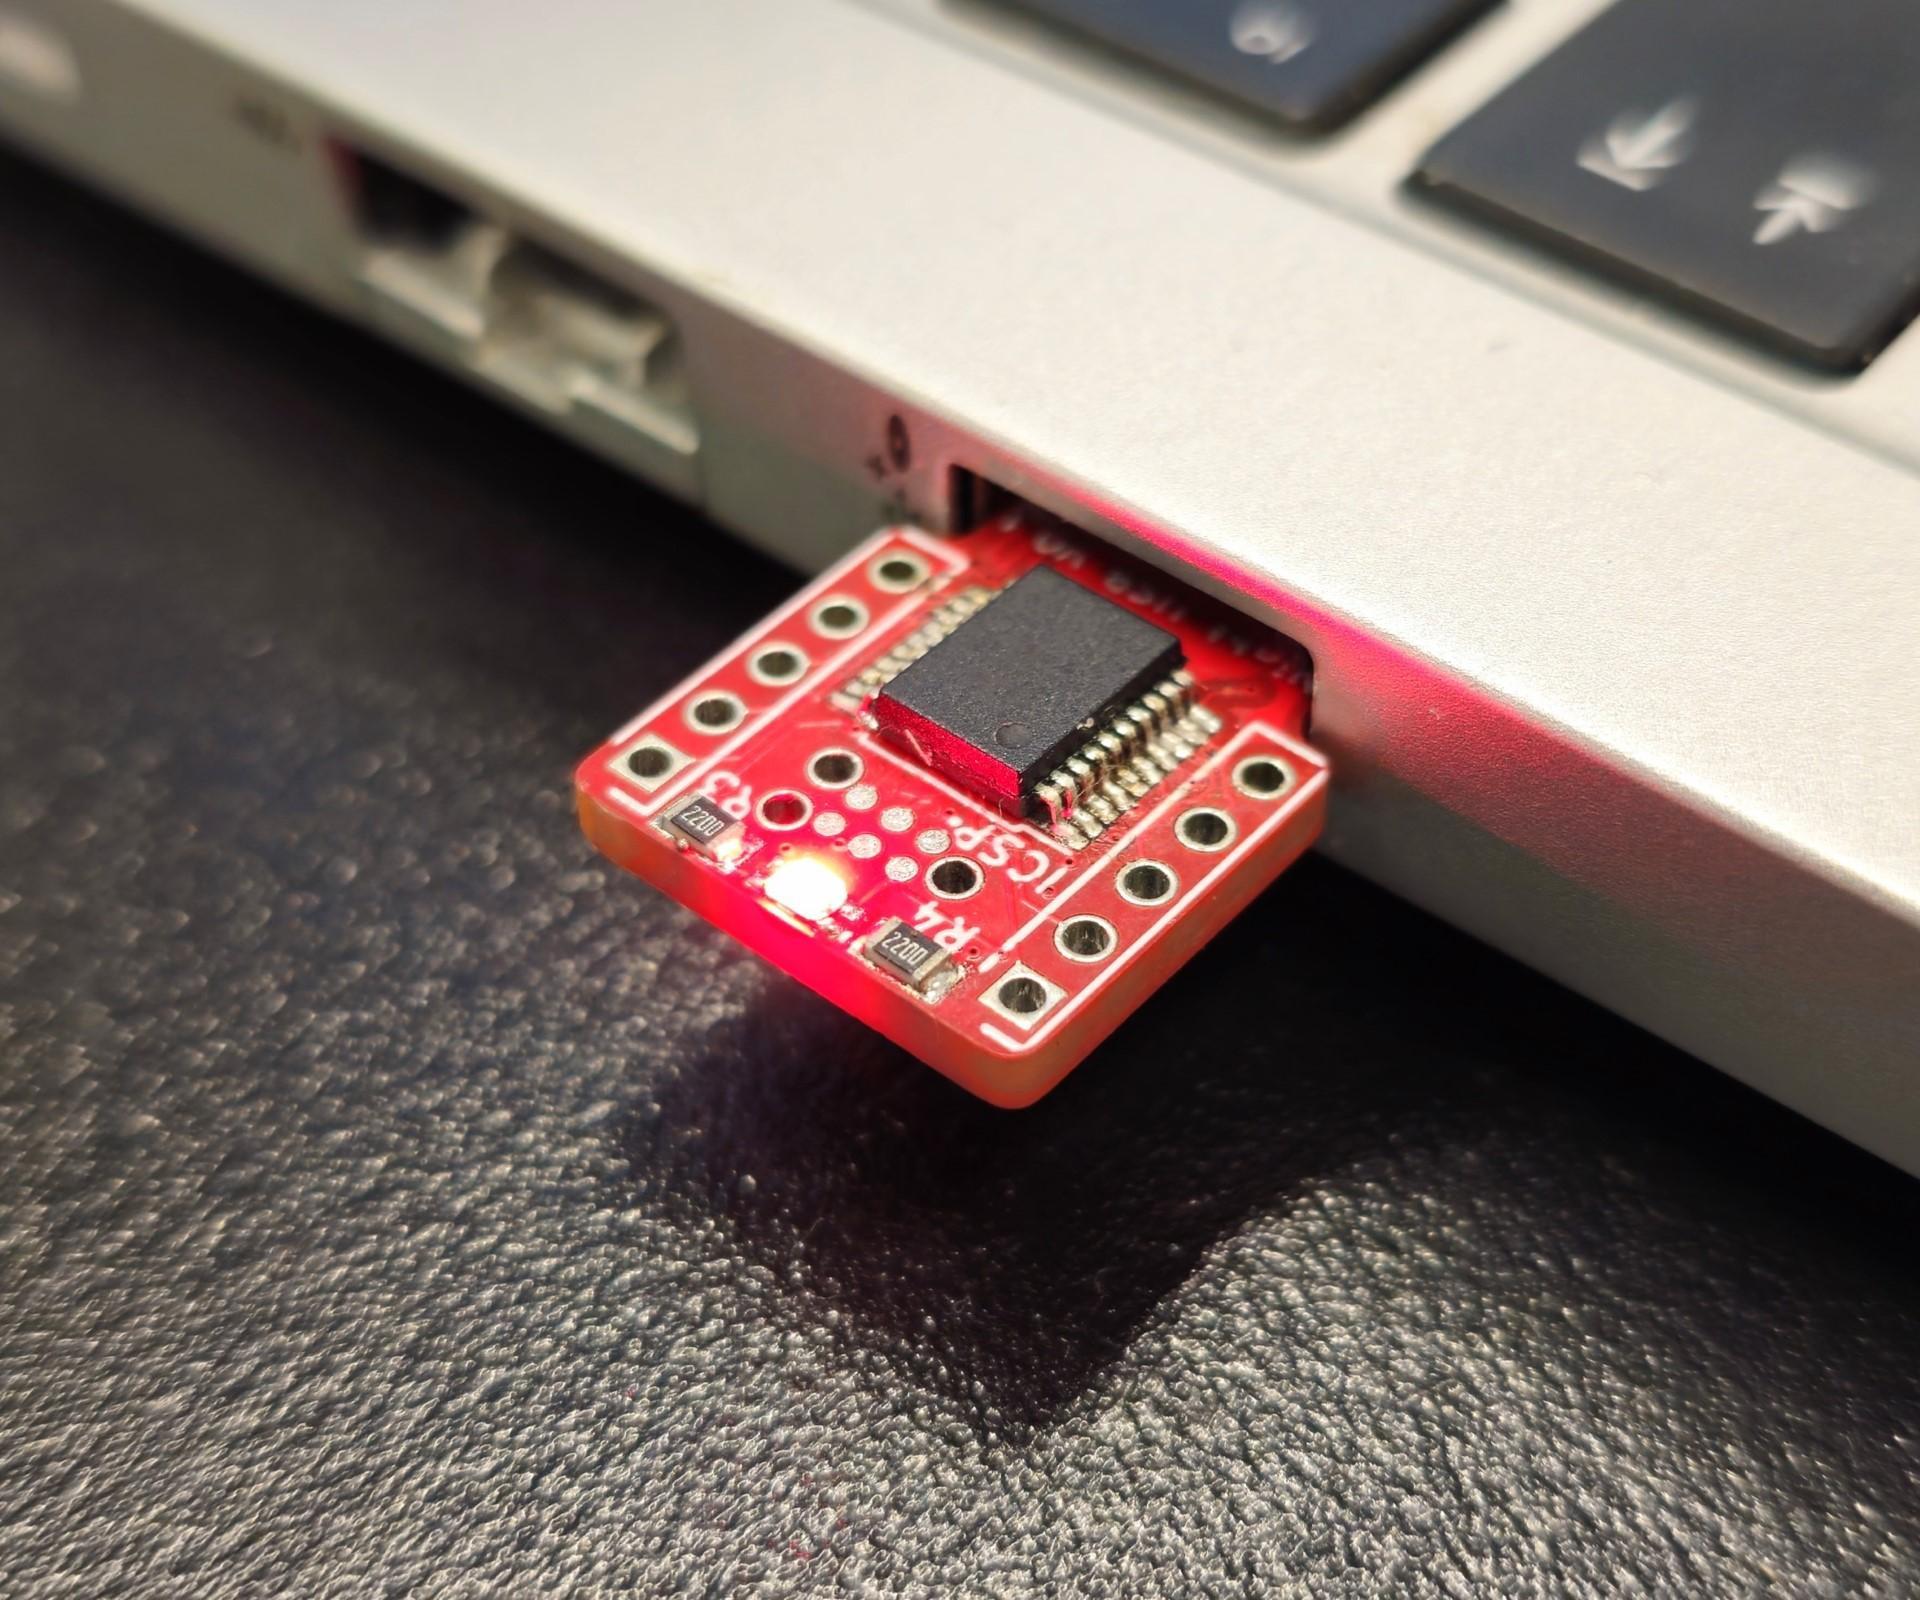 NightUSB: a Hackable USB for Testing and Developing USB Solutions.